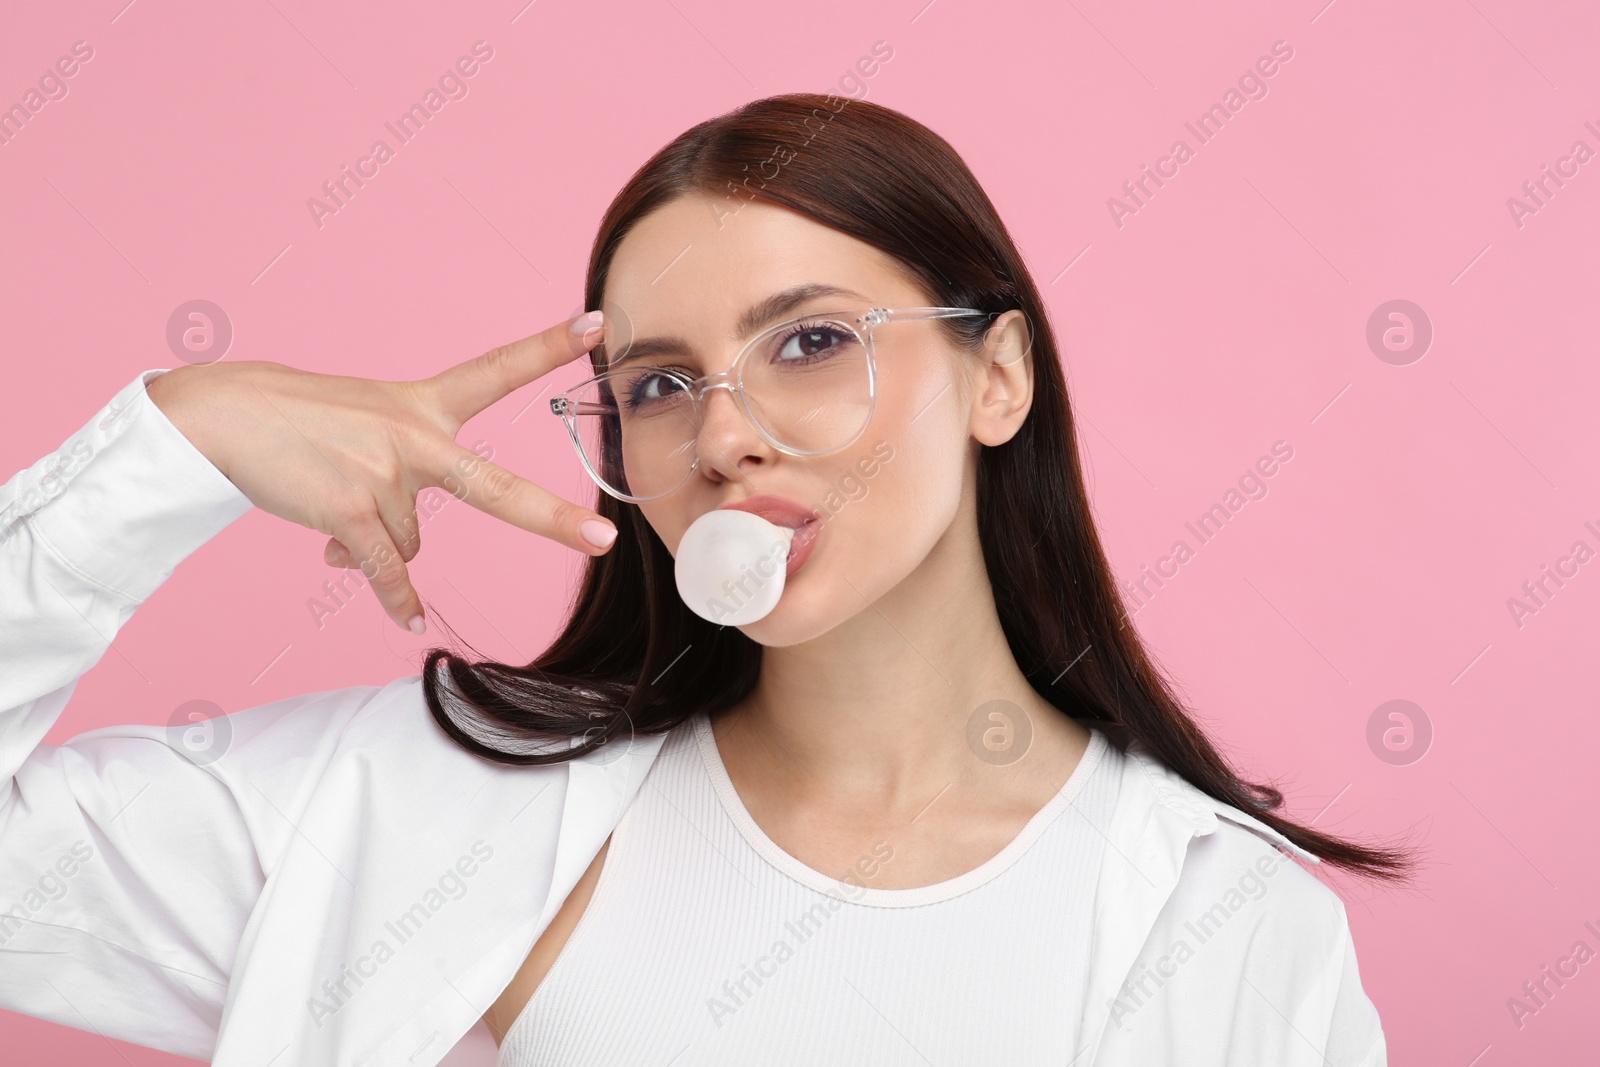 Photo of Beautiful woman in glasses blowing bubble gum and gesturing on pink background